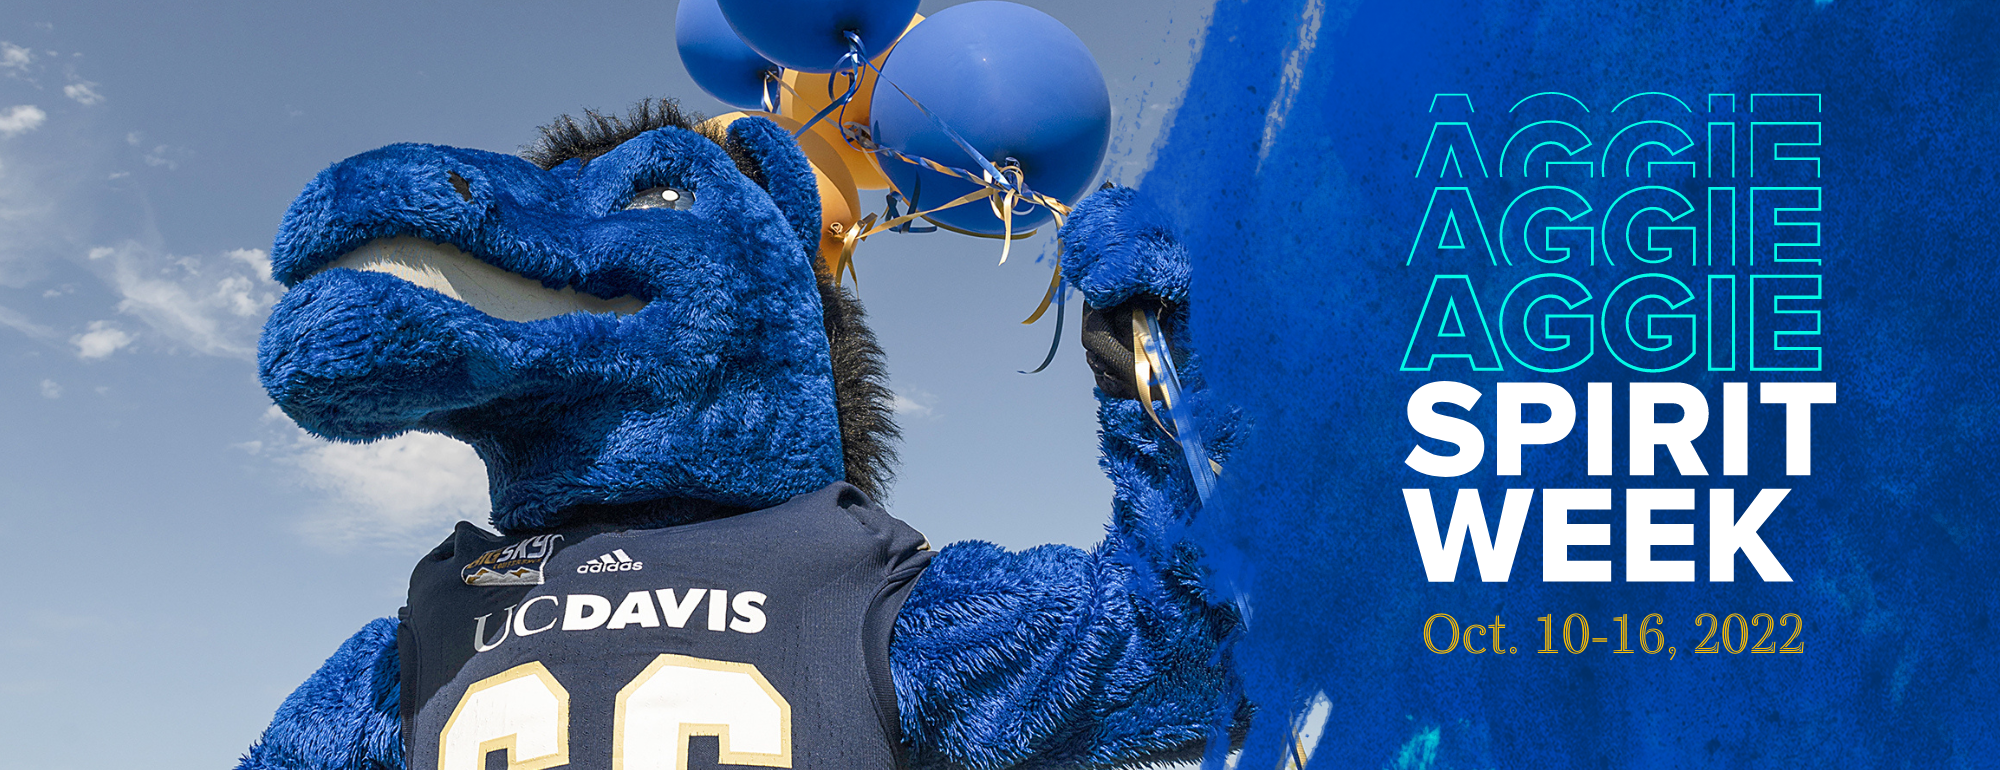 Photo of Gunrock holding blue and gold balloons is on the left. There is a blue overlay with the Aggie Spirit Week logo and event dates of "Oct 10-16, 2022" underneath.